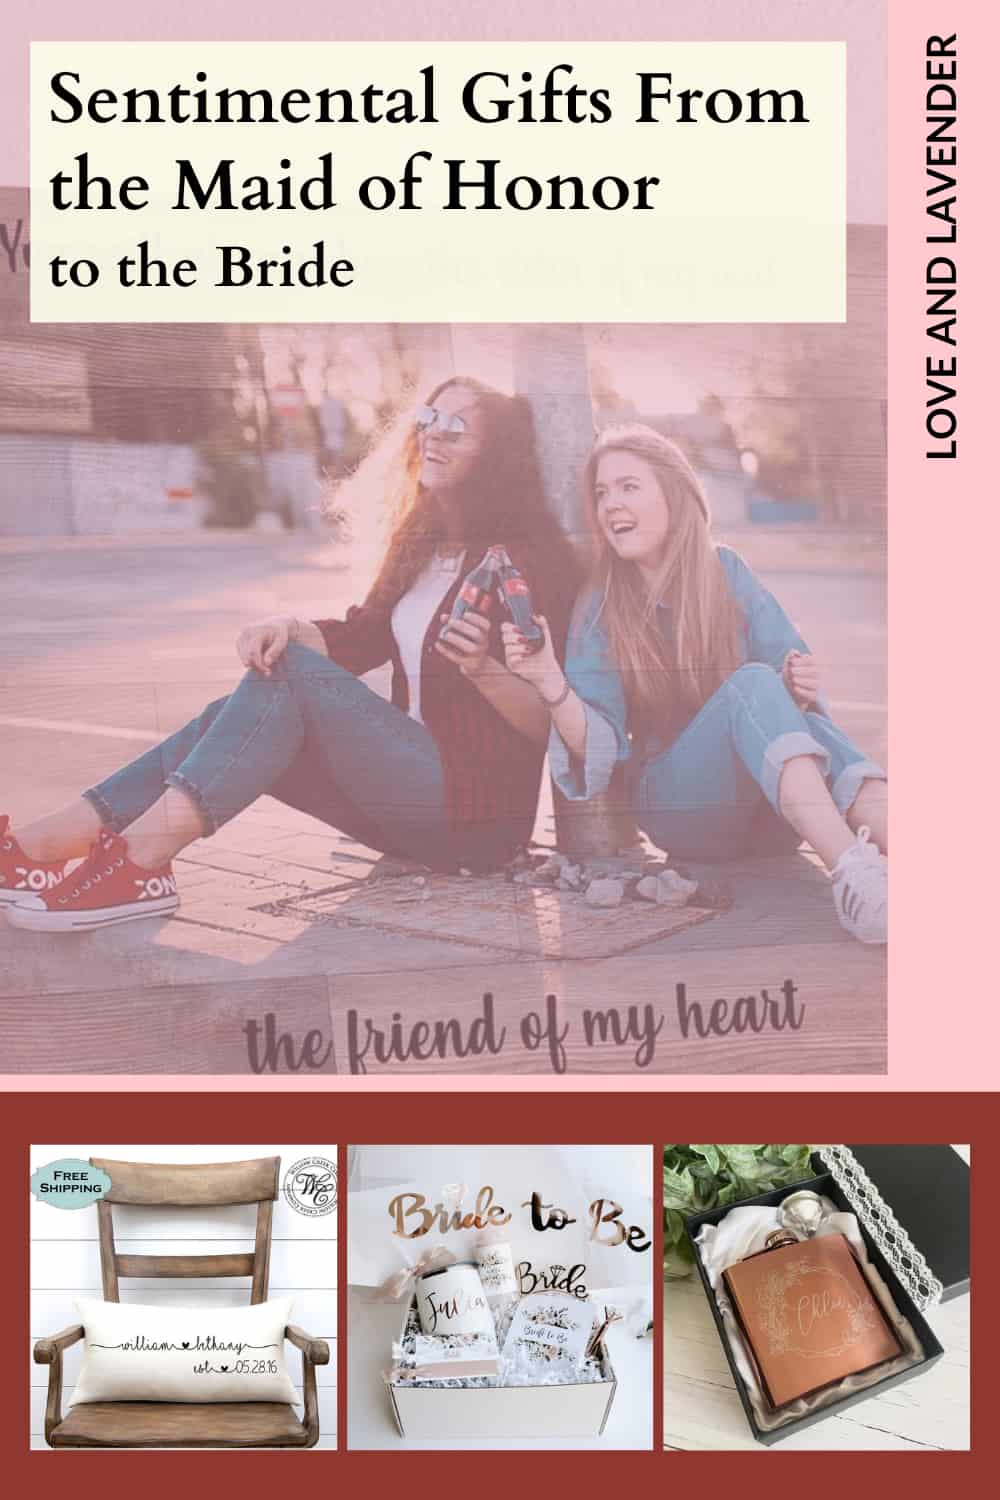 21 Maid of Honor Gift Ideas - Pinterest pin